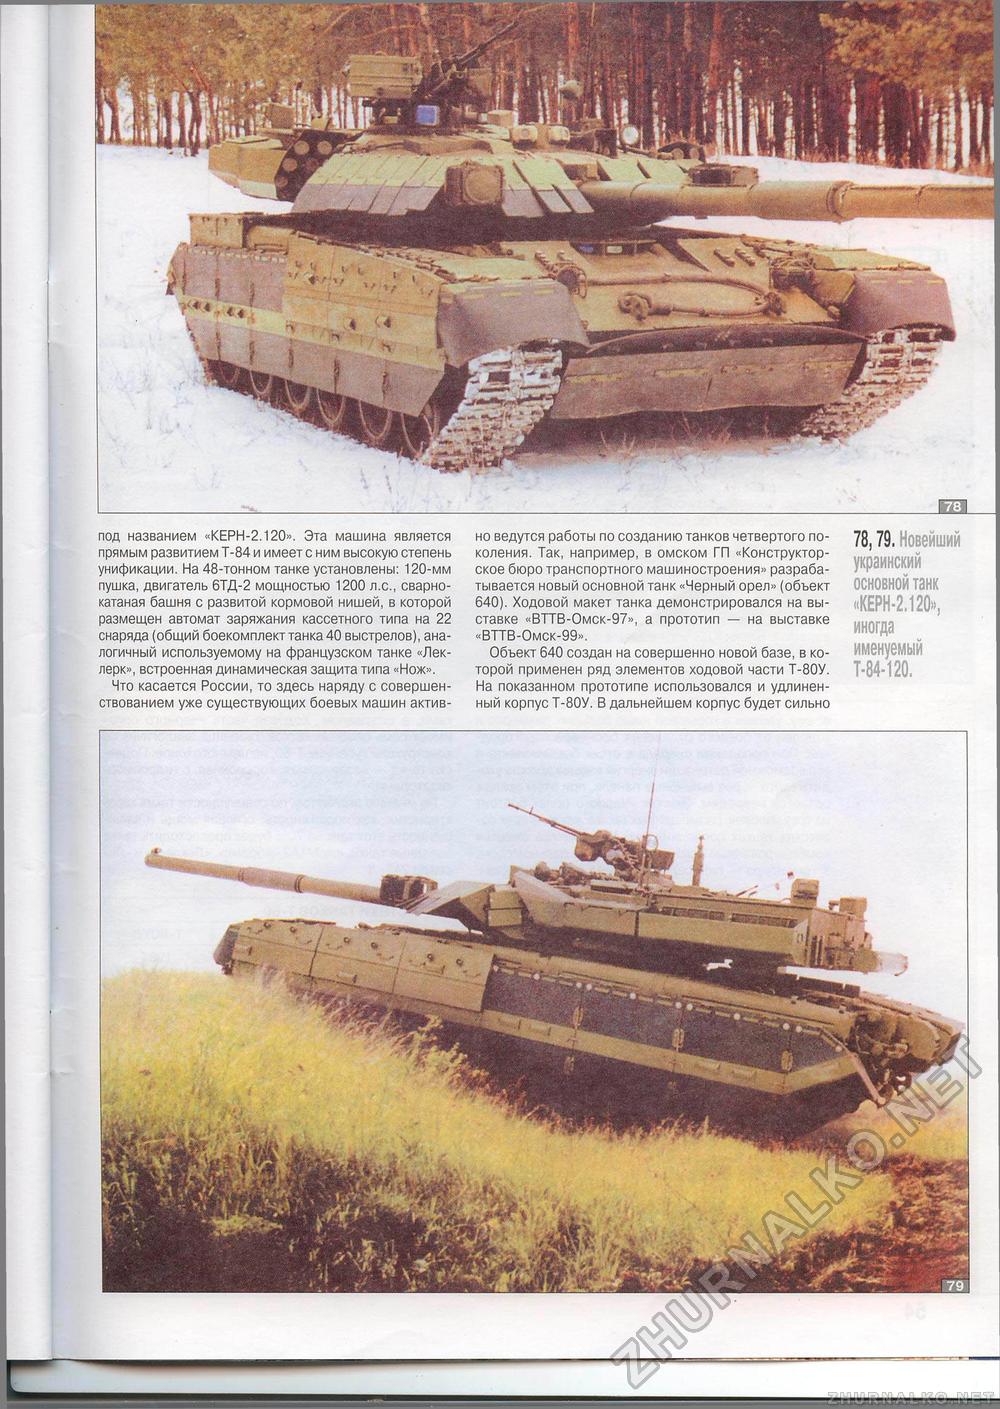  Special - T-80,  59